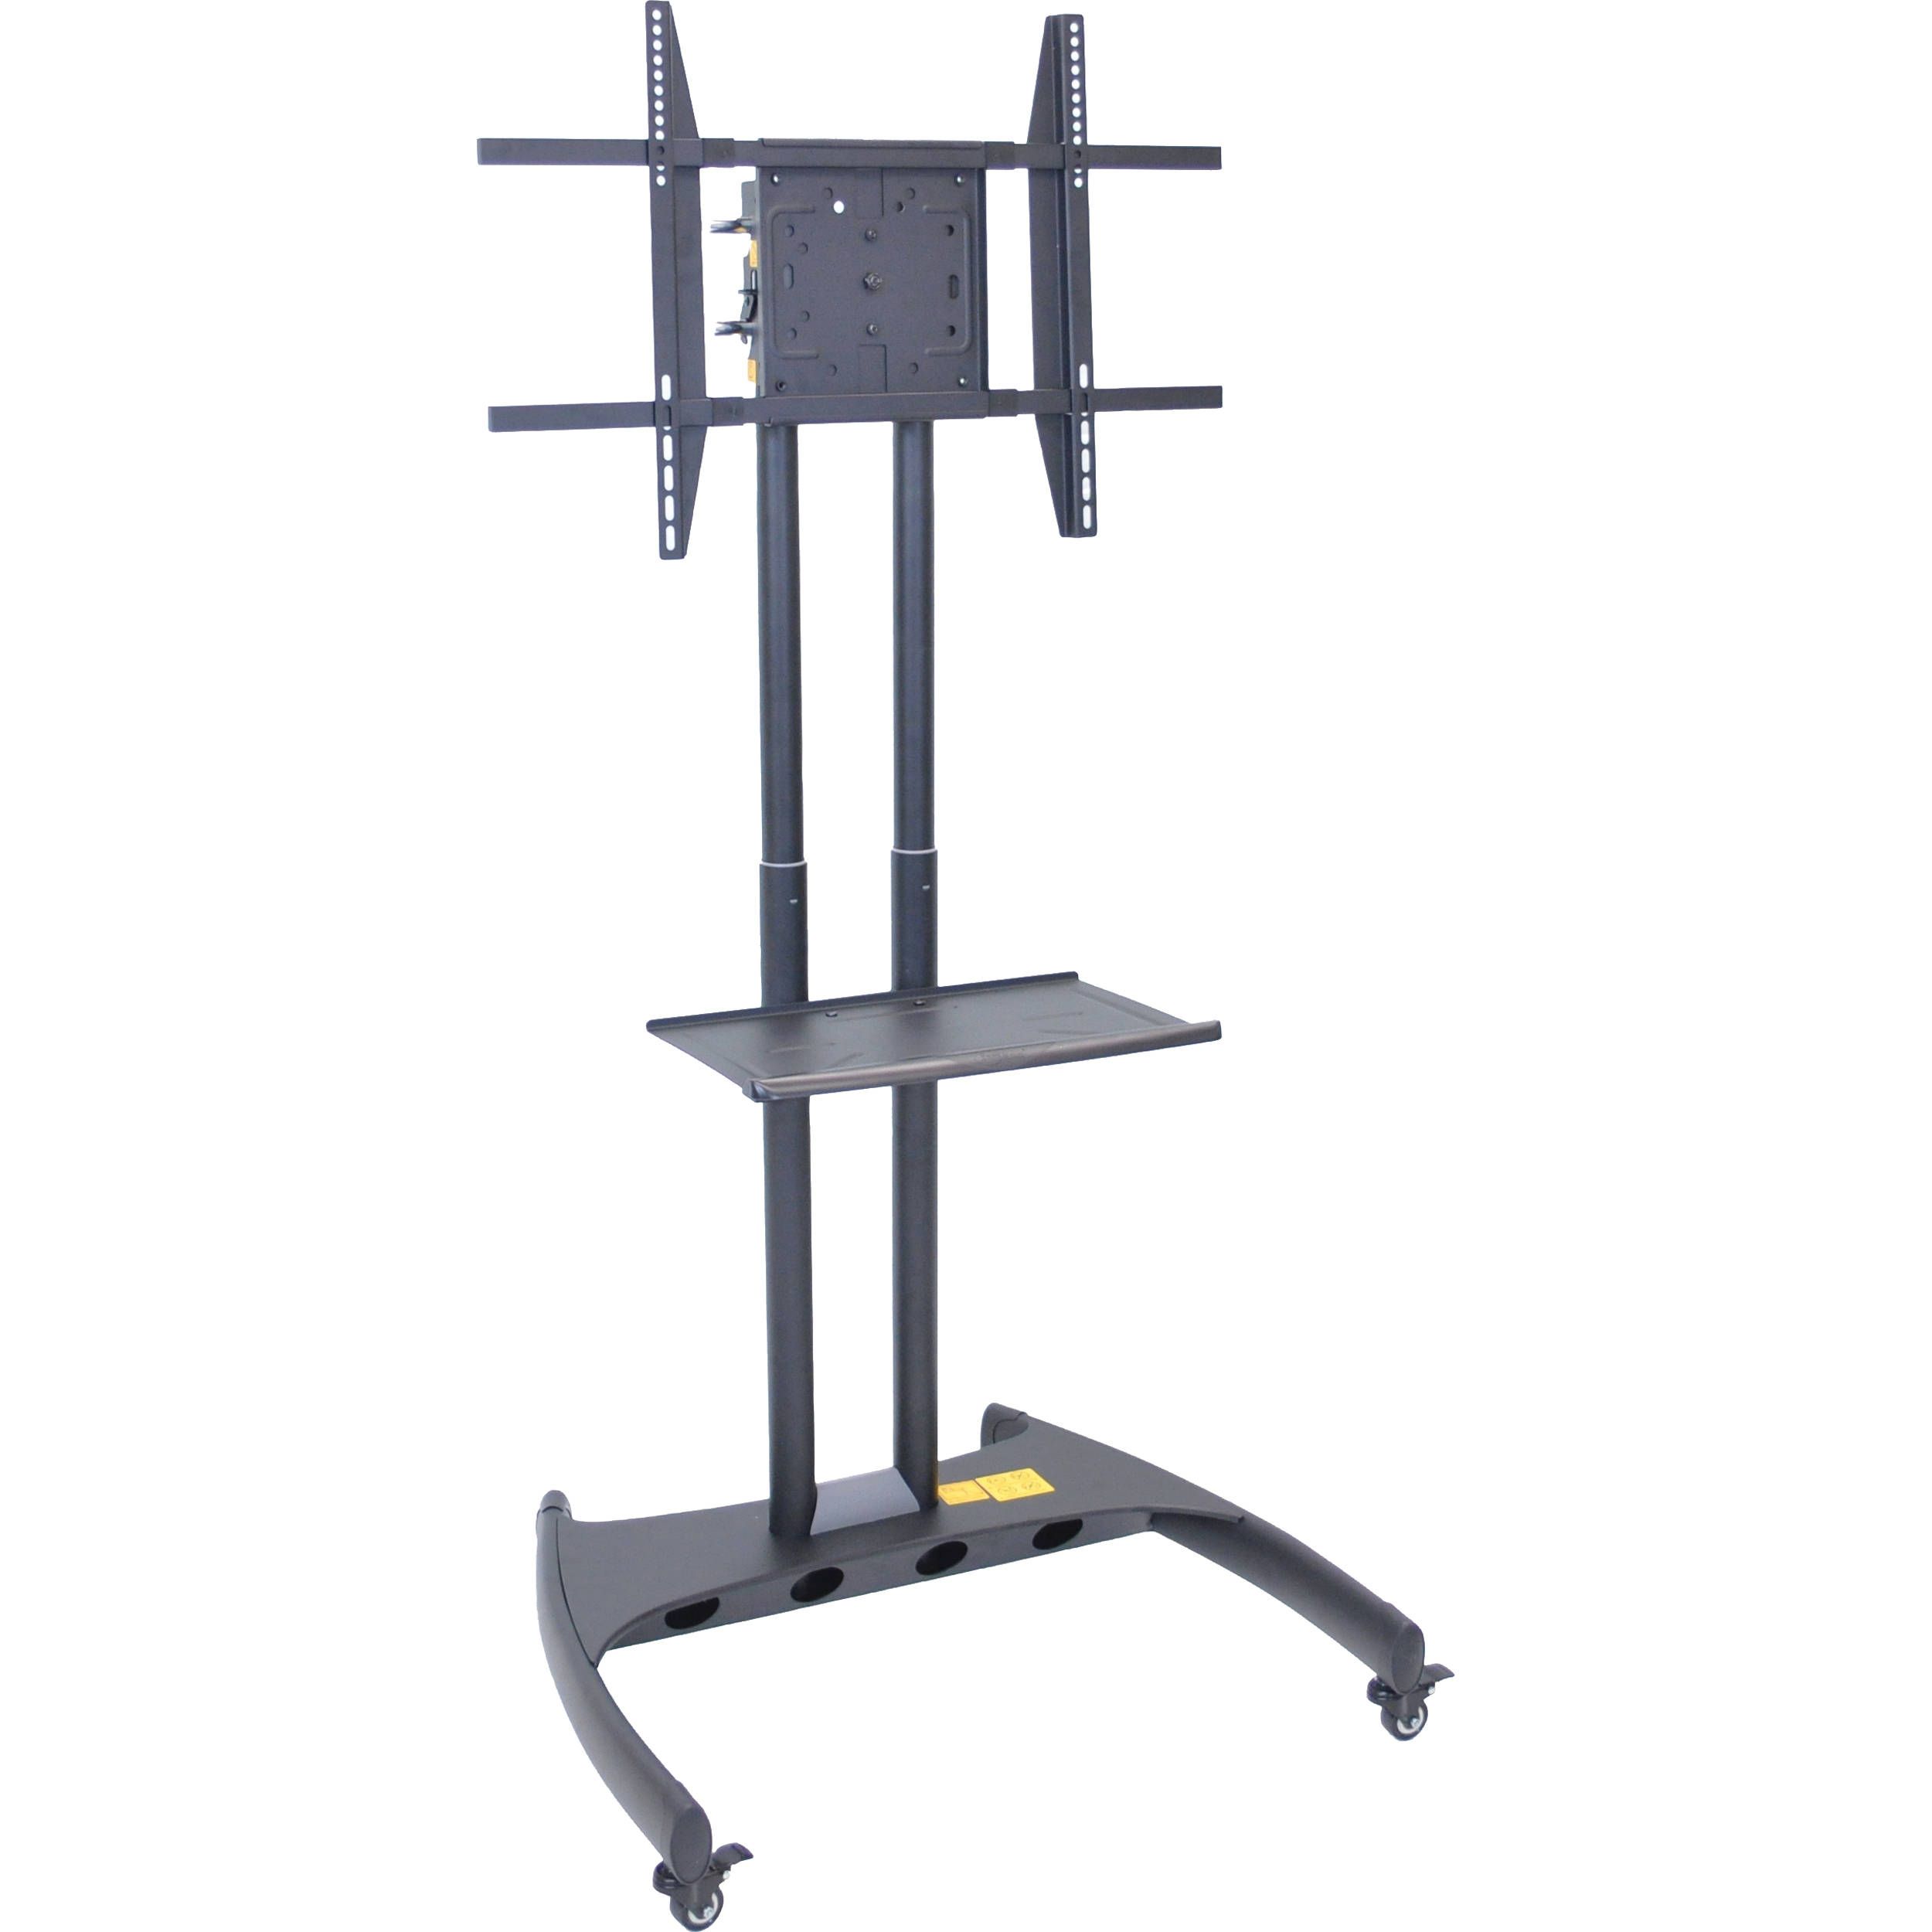 Luxor Fp3500 Adjustable Height Lcd Tv Stand Fp3500 B&h Photo Within Wall Mount Adjustable Tv Stands (View 13 of 15)